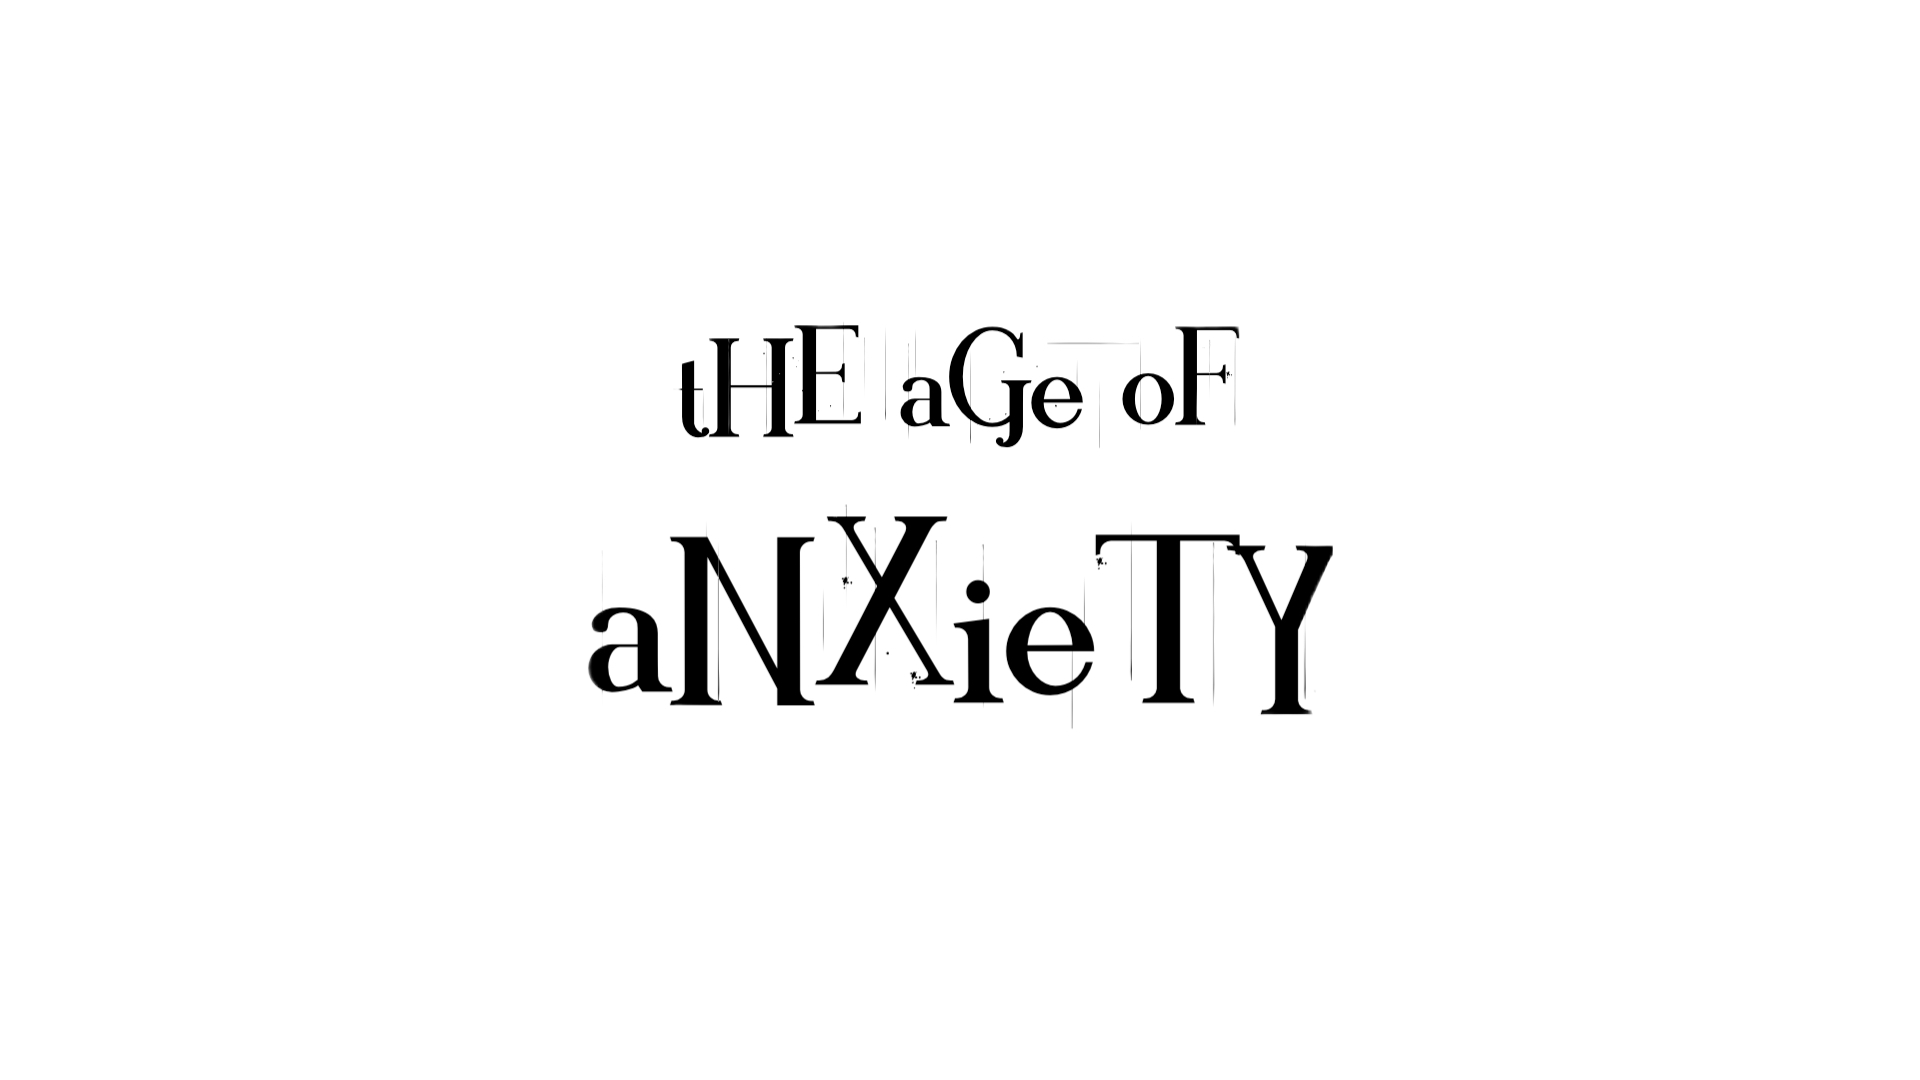 tHE aGe oF aNXieTy